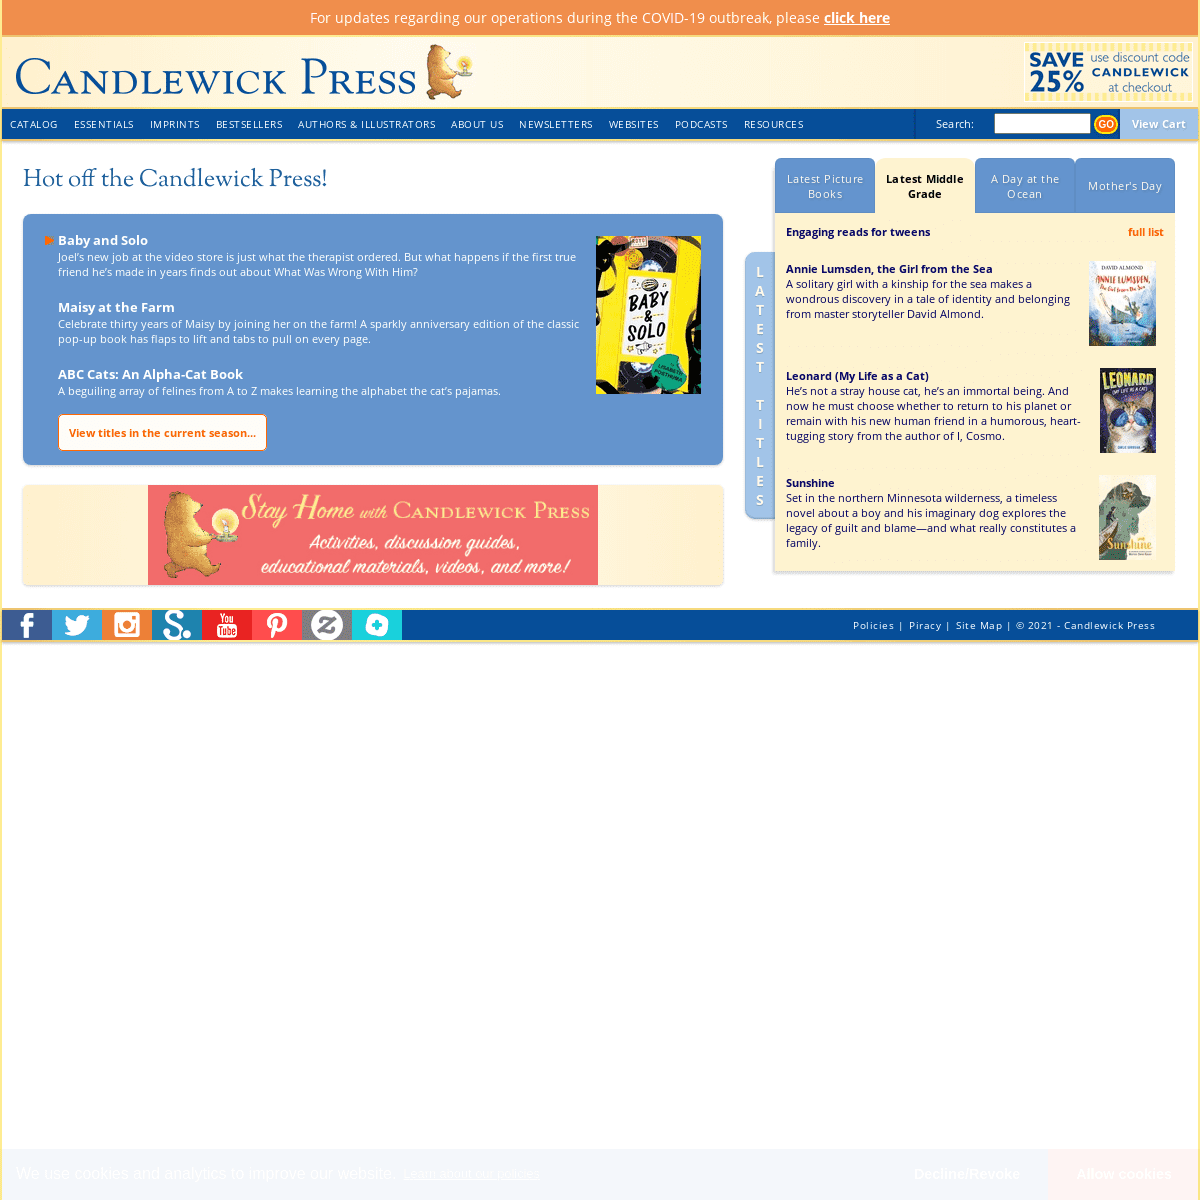 A complete backup of https://candlewick.com